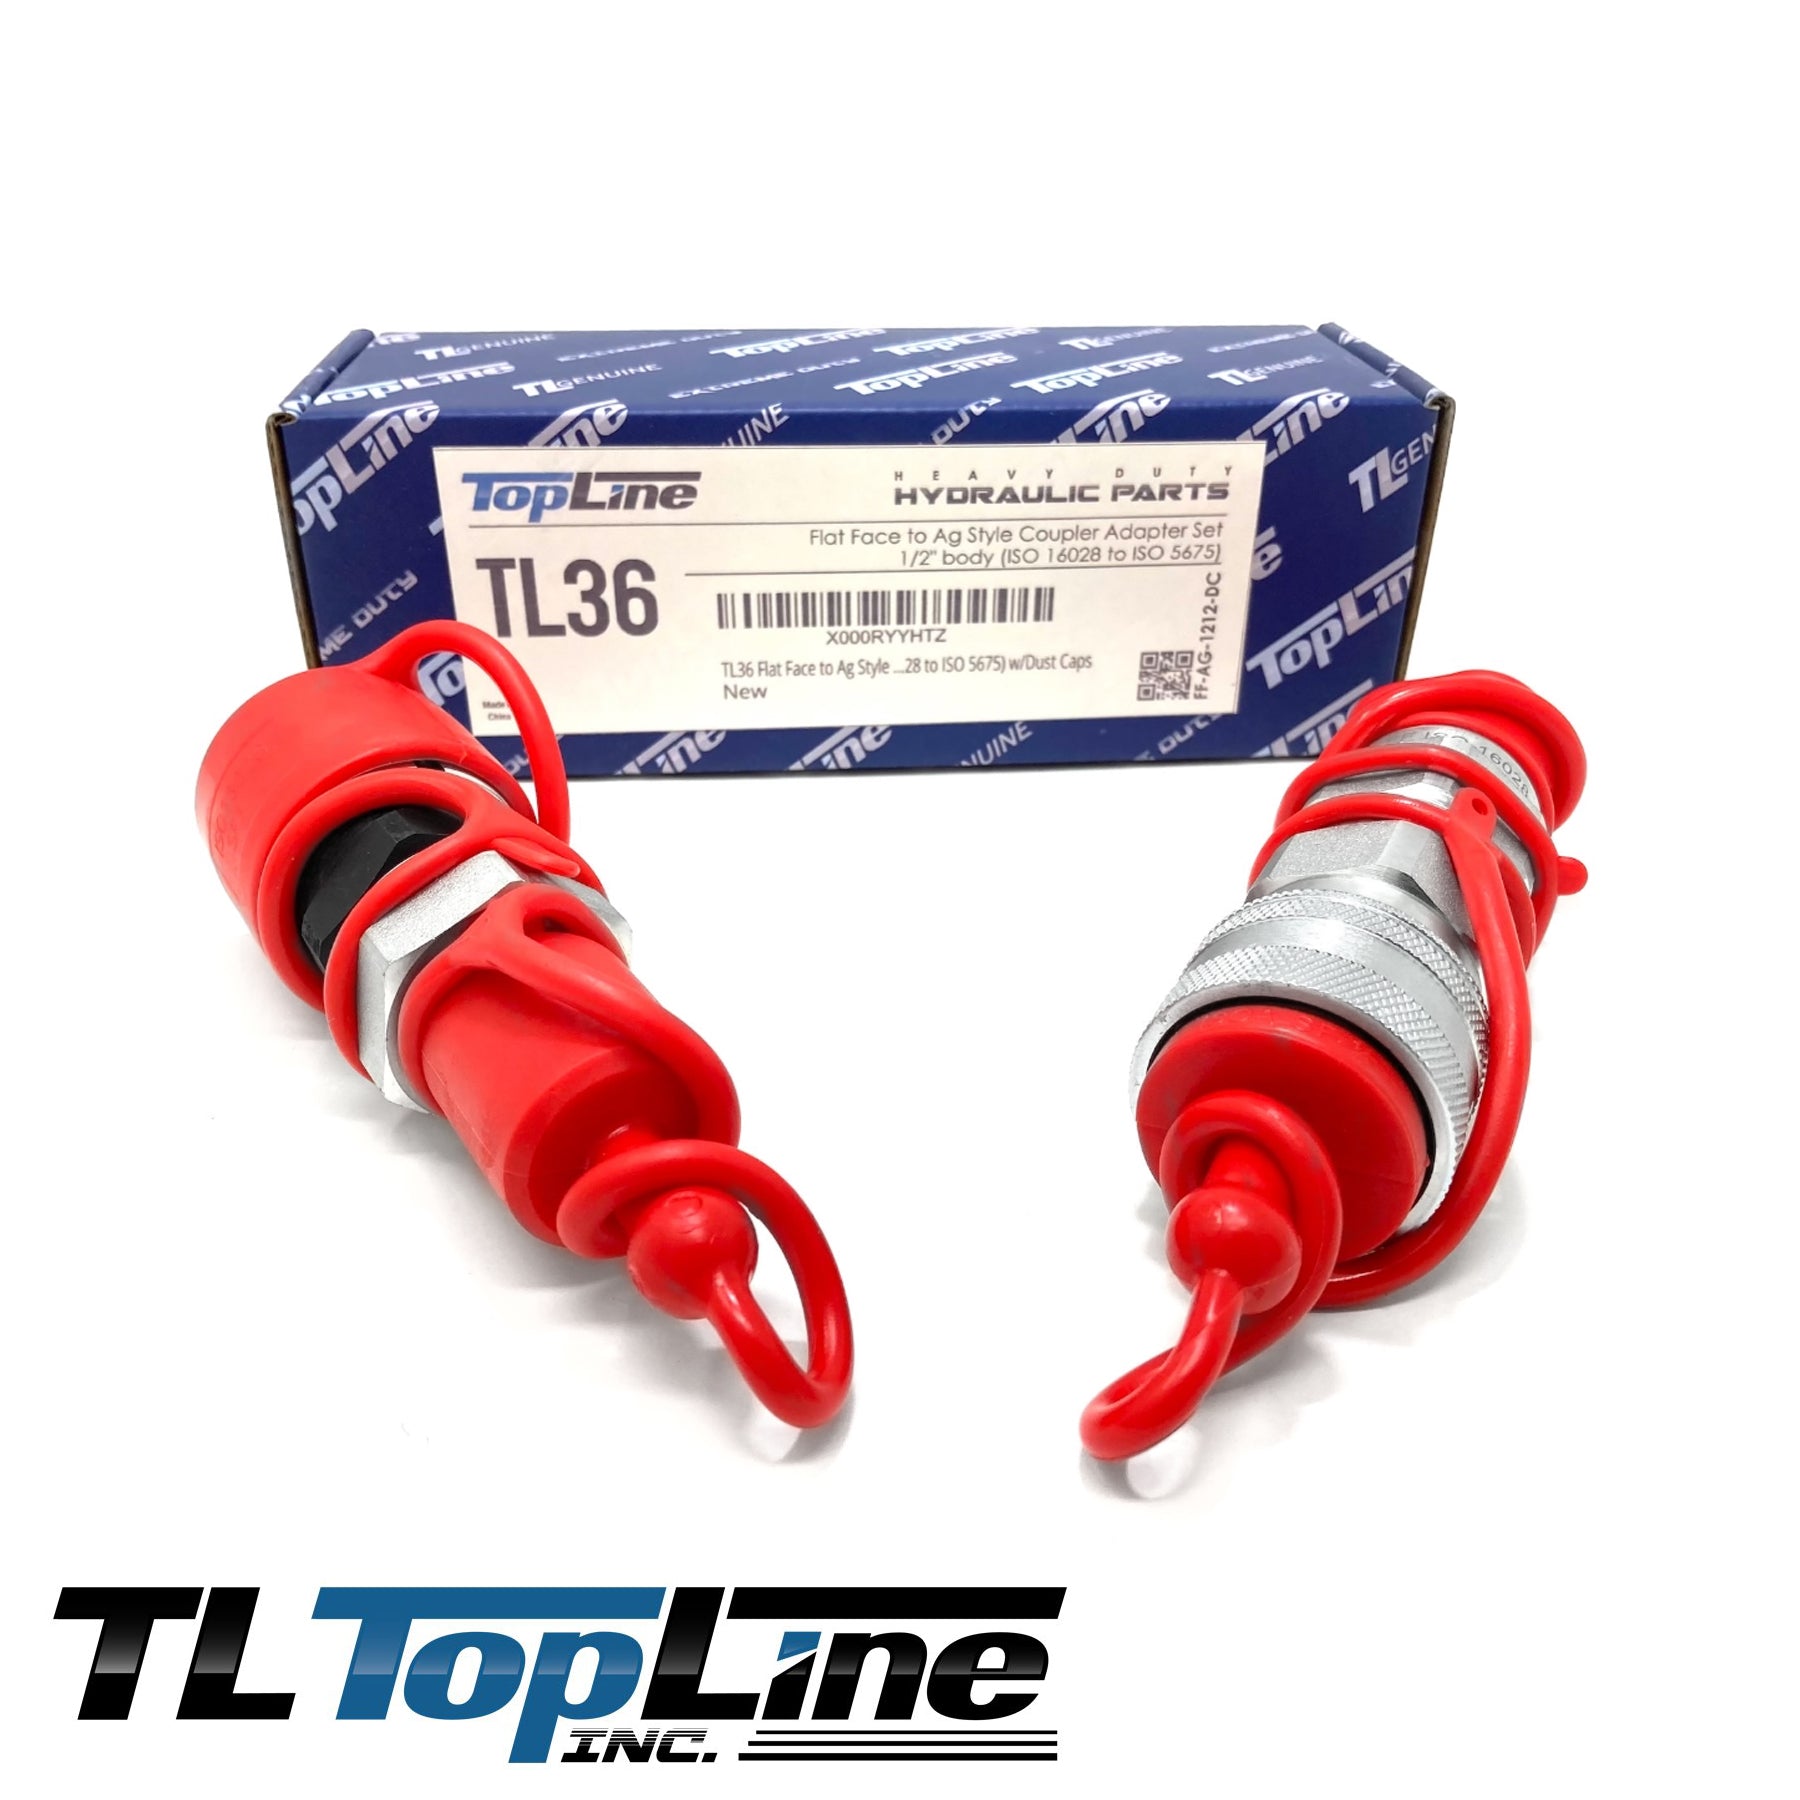 TL36 Flat Face to Ag style Quick Coupler Adapter Set 1/2